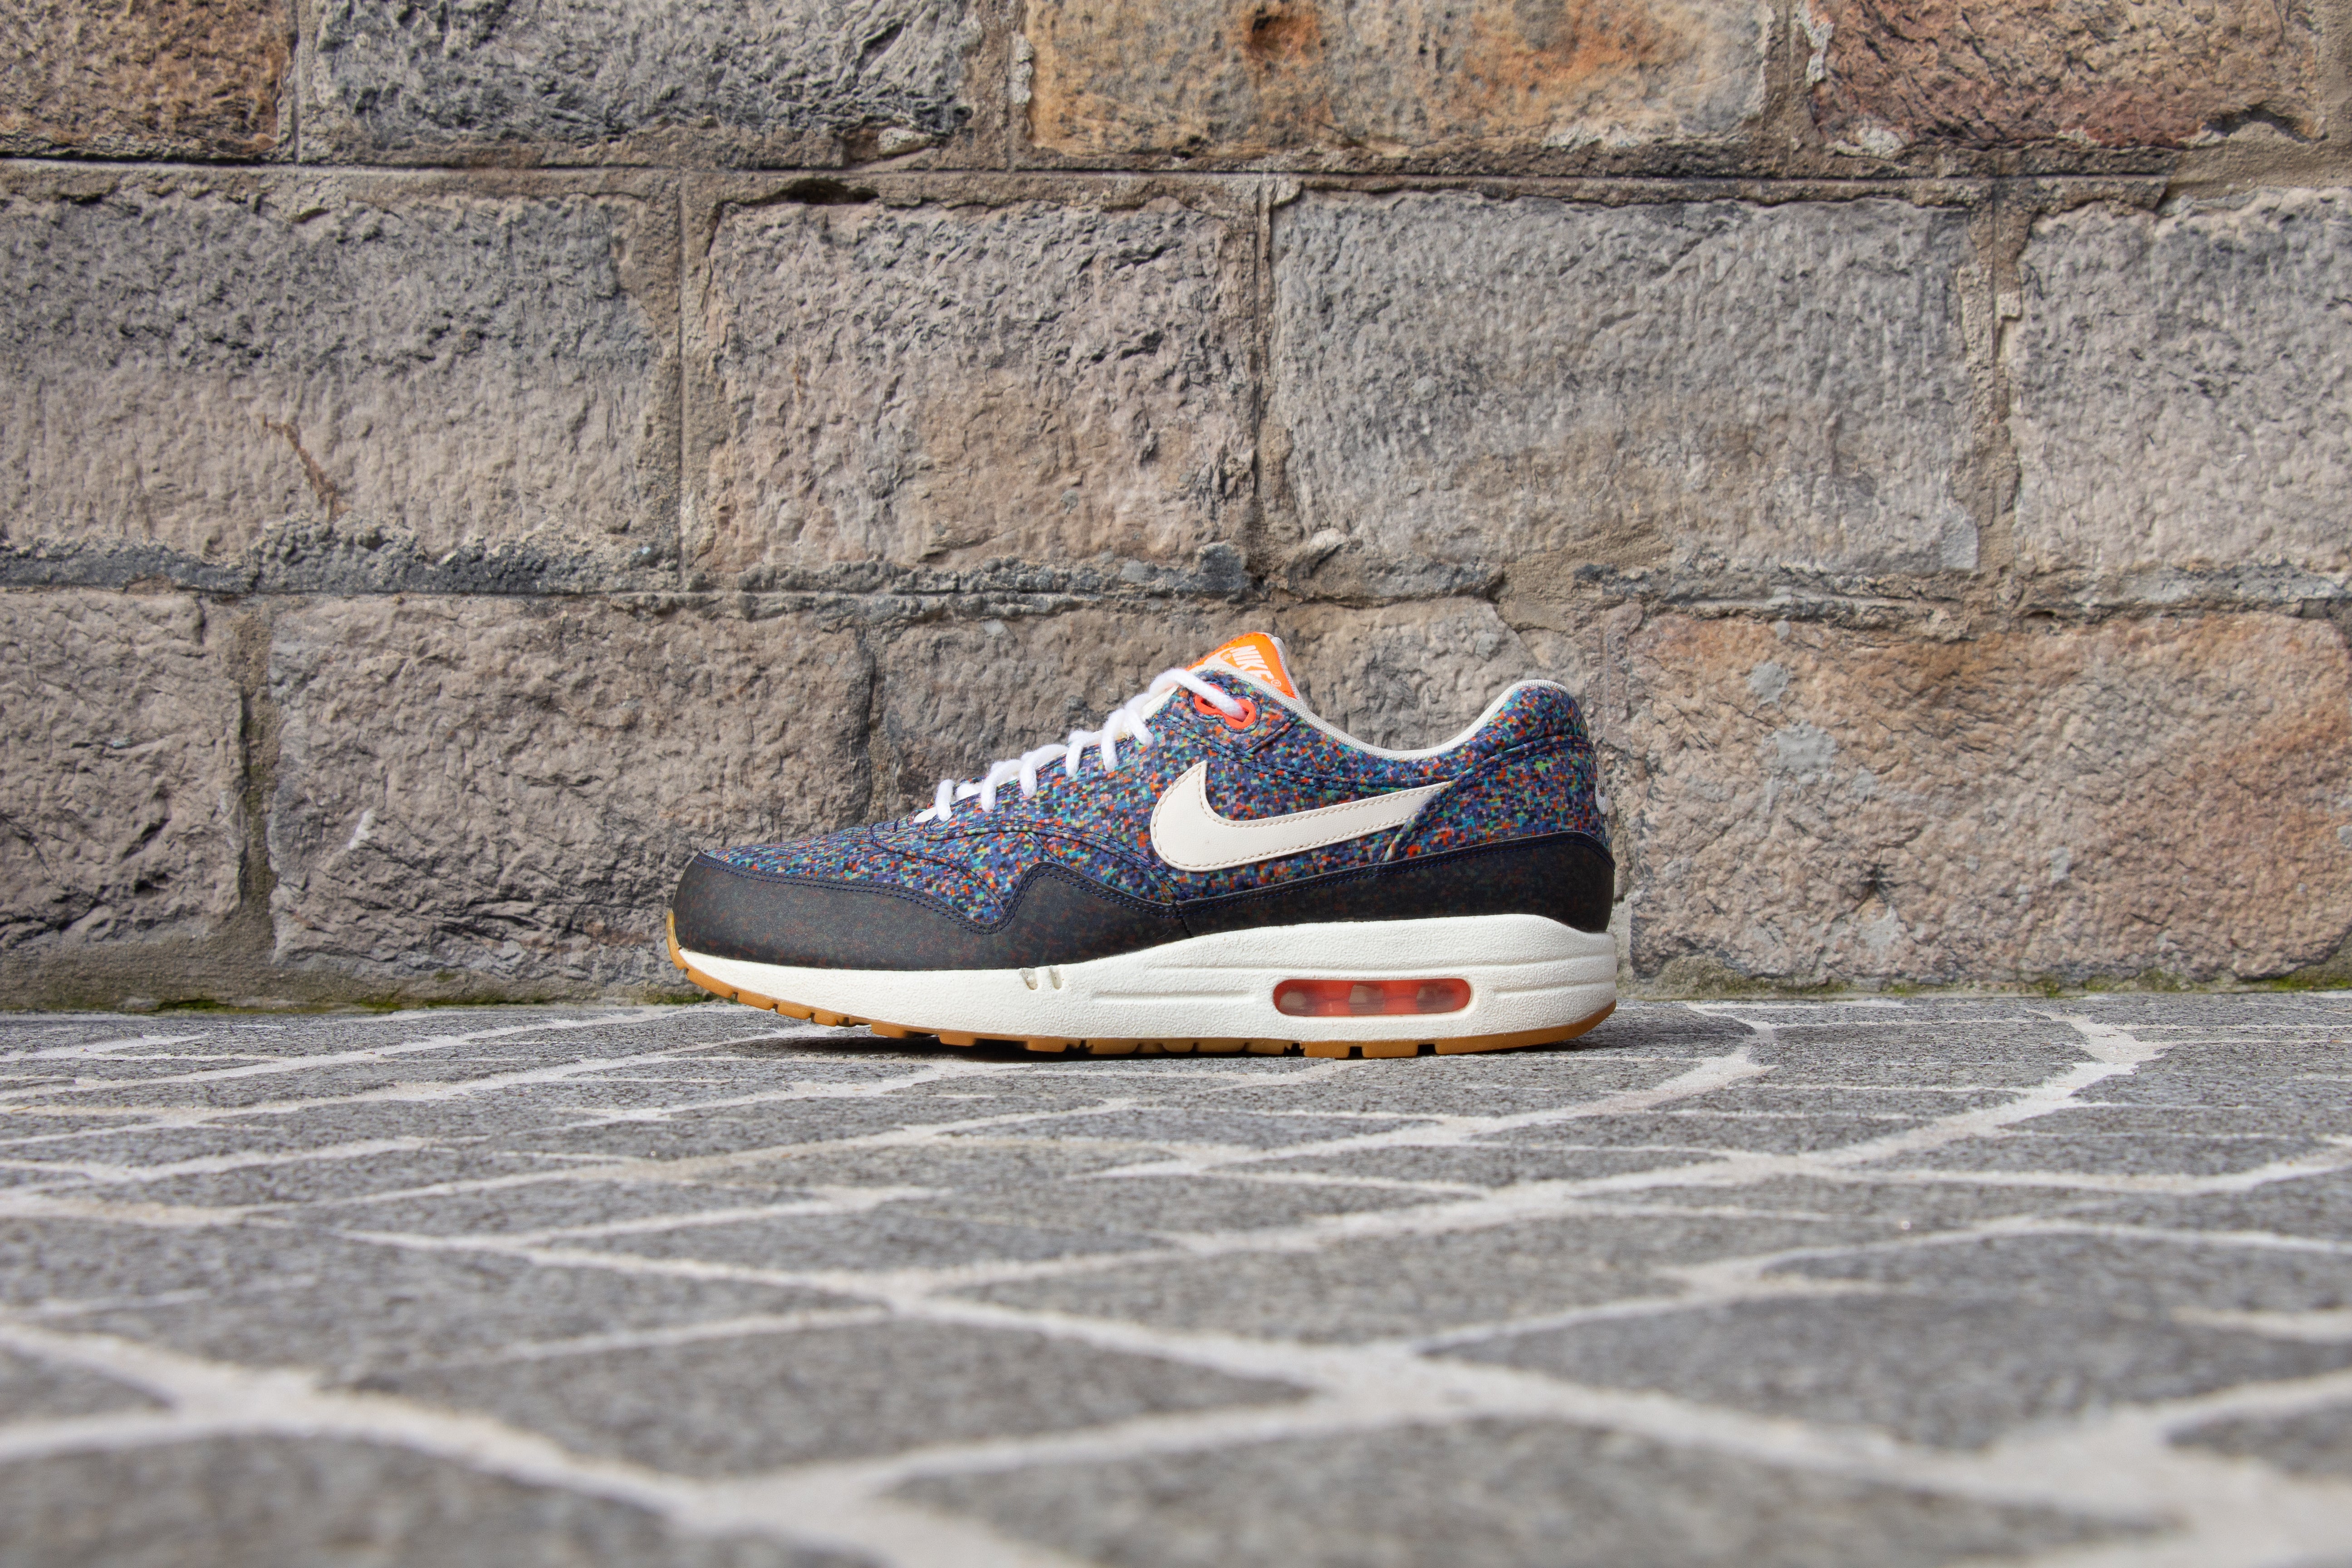 Nike Air Max 1 Liberty of London (2013) (528712-400) | La Boite Collector Sneakers Shop – COLLECTOR